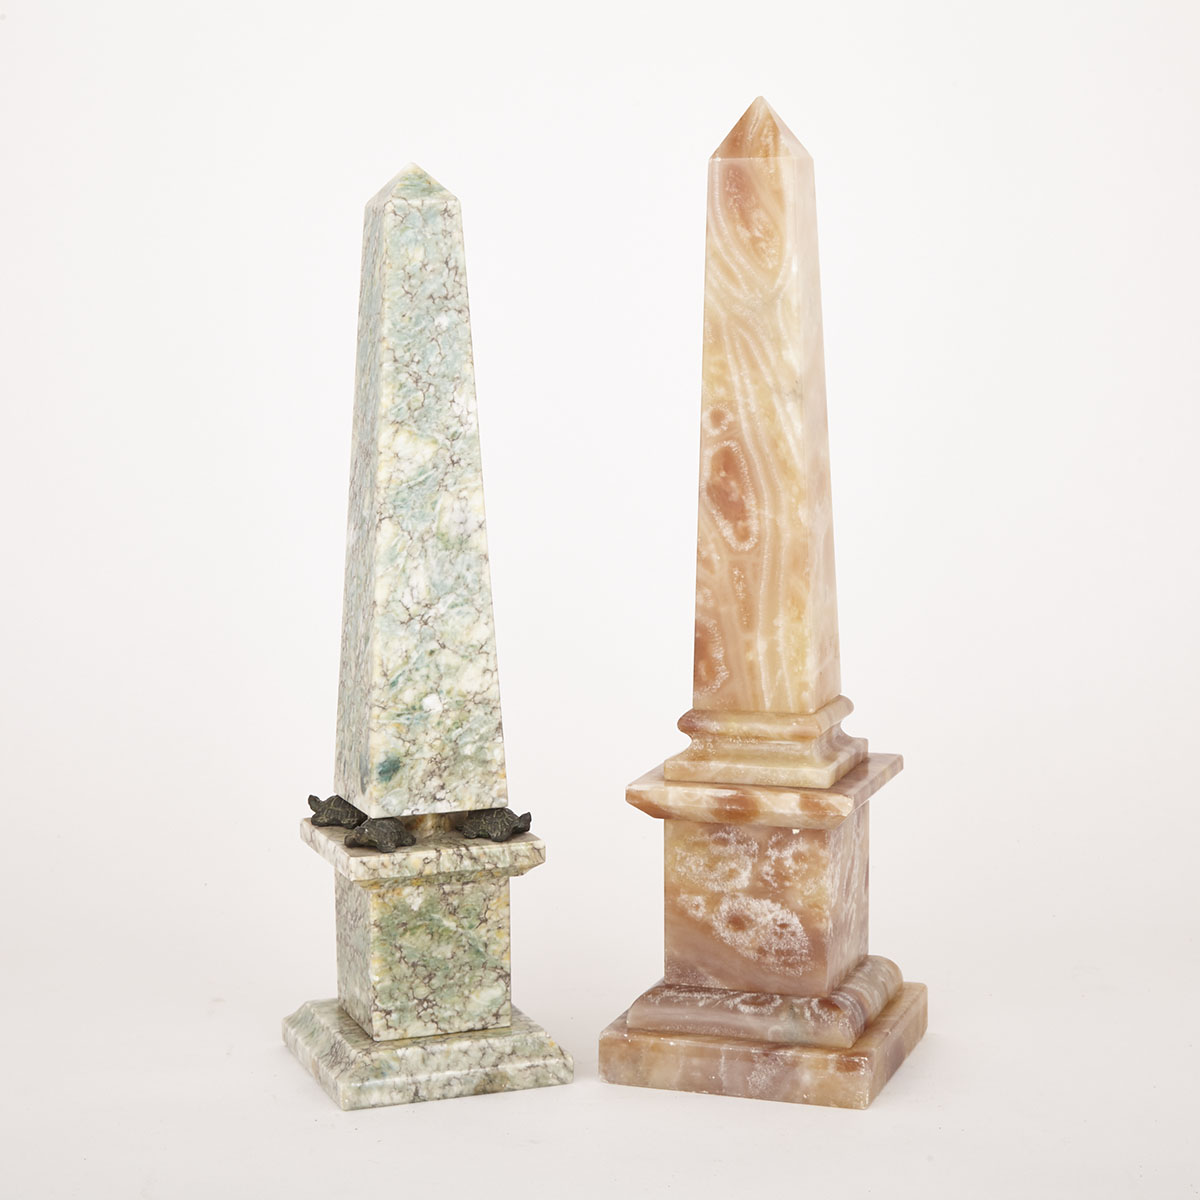 Two Italian Stone Obelisks, 19th and 20th centuries